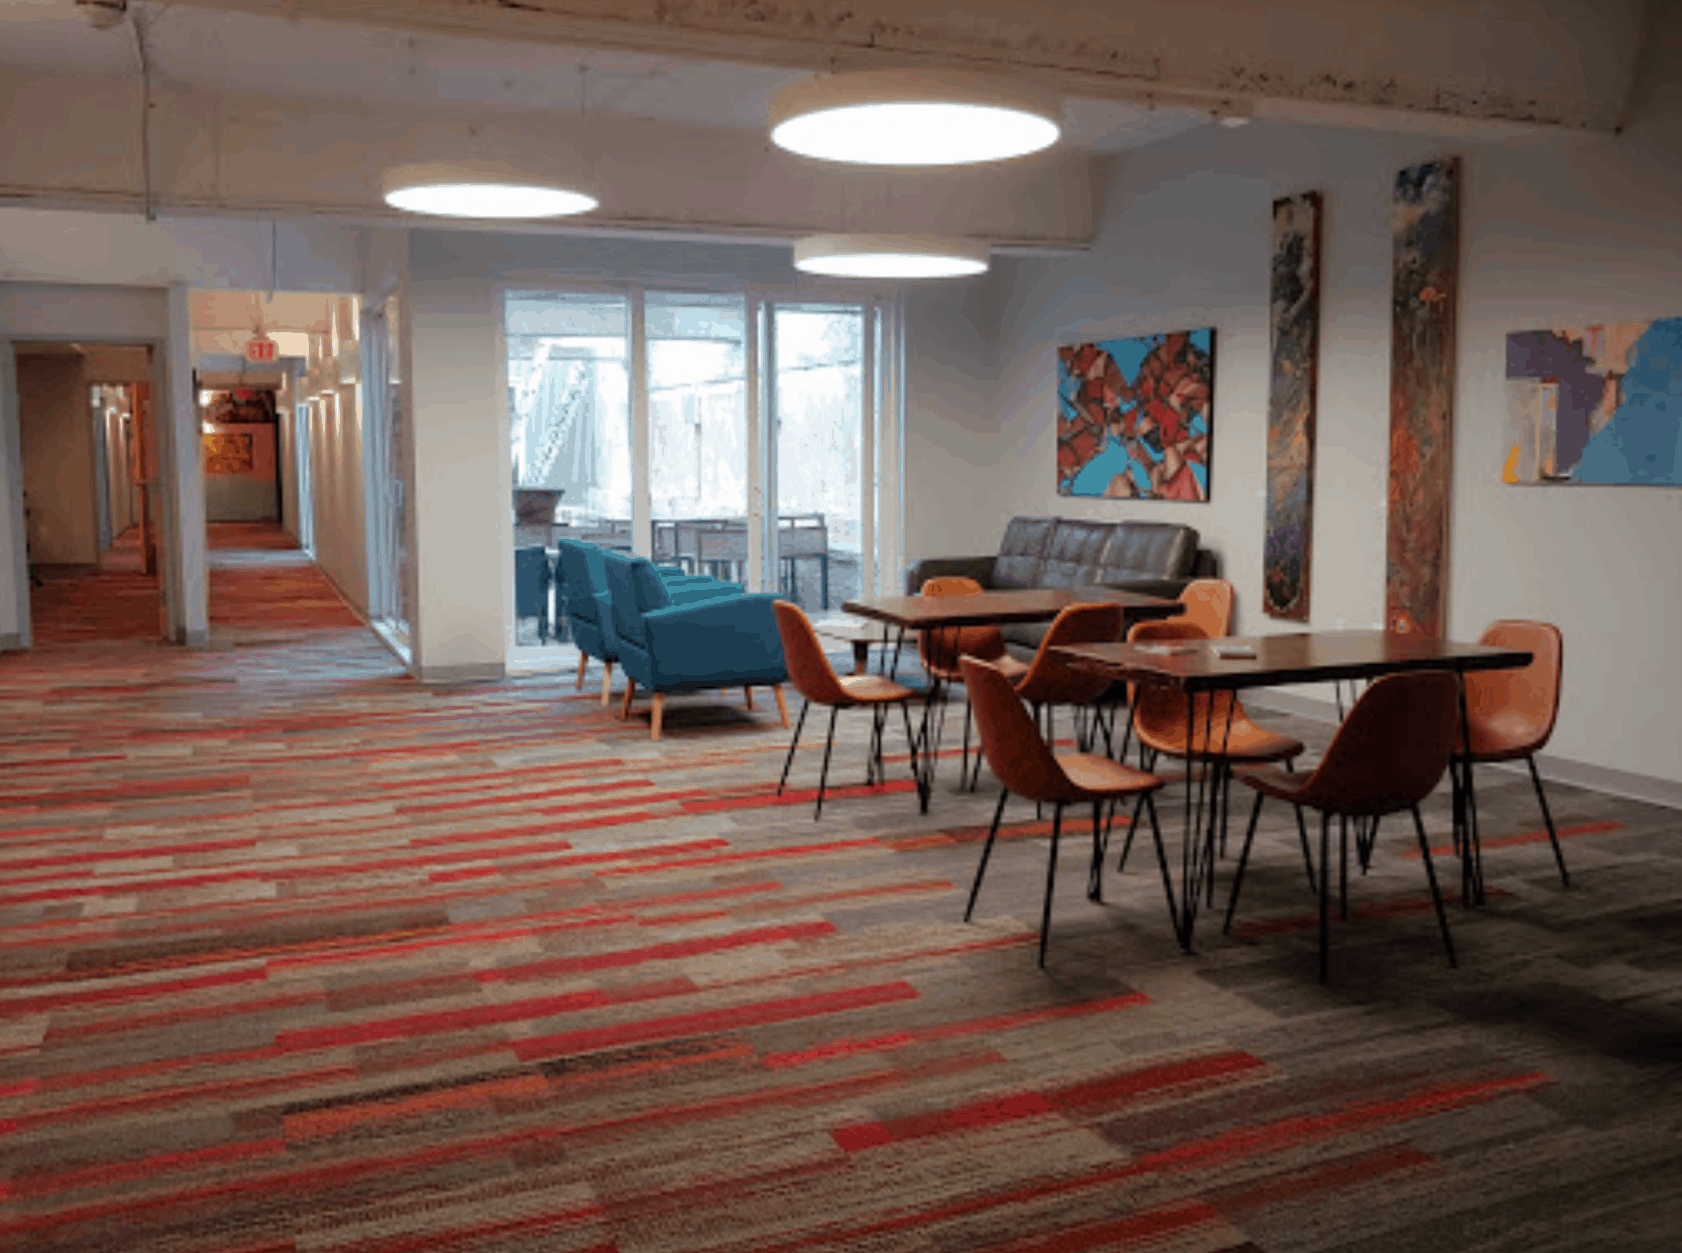 The Best Coworking Spaces In Maryland - DropDesk